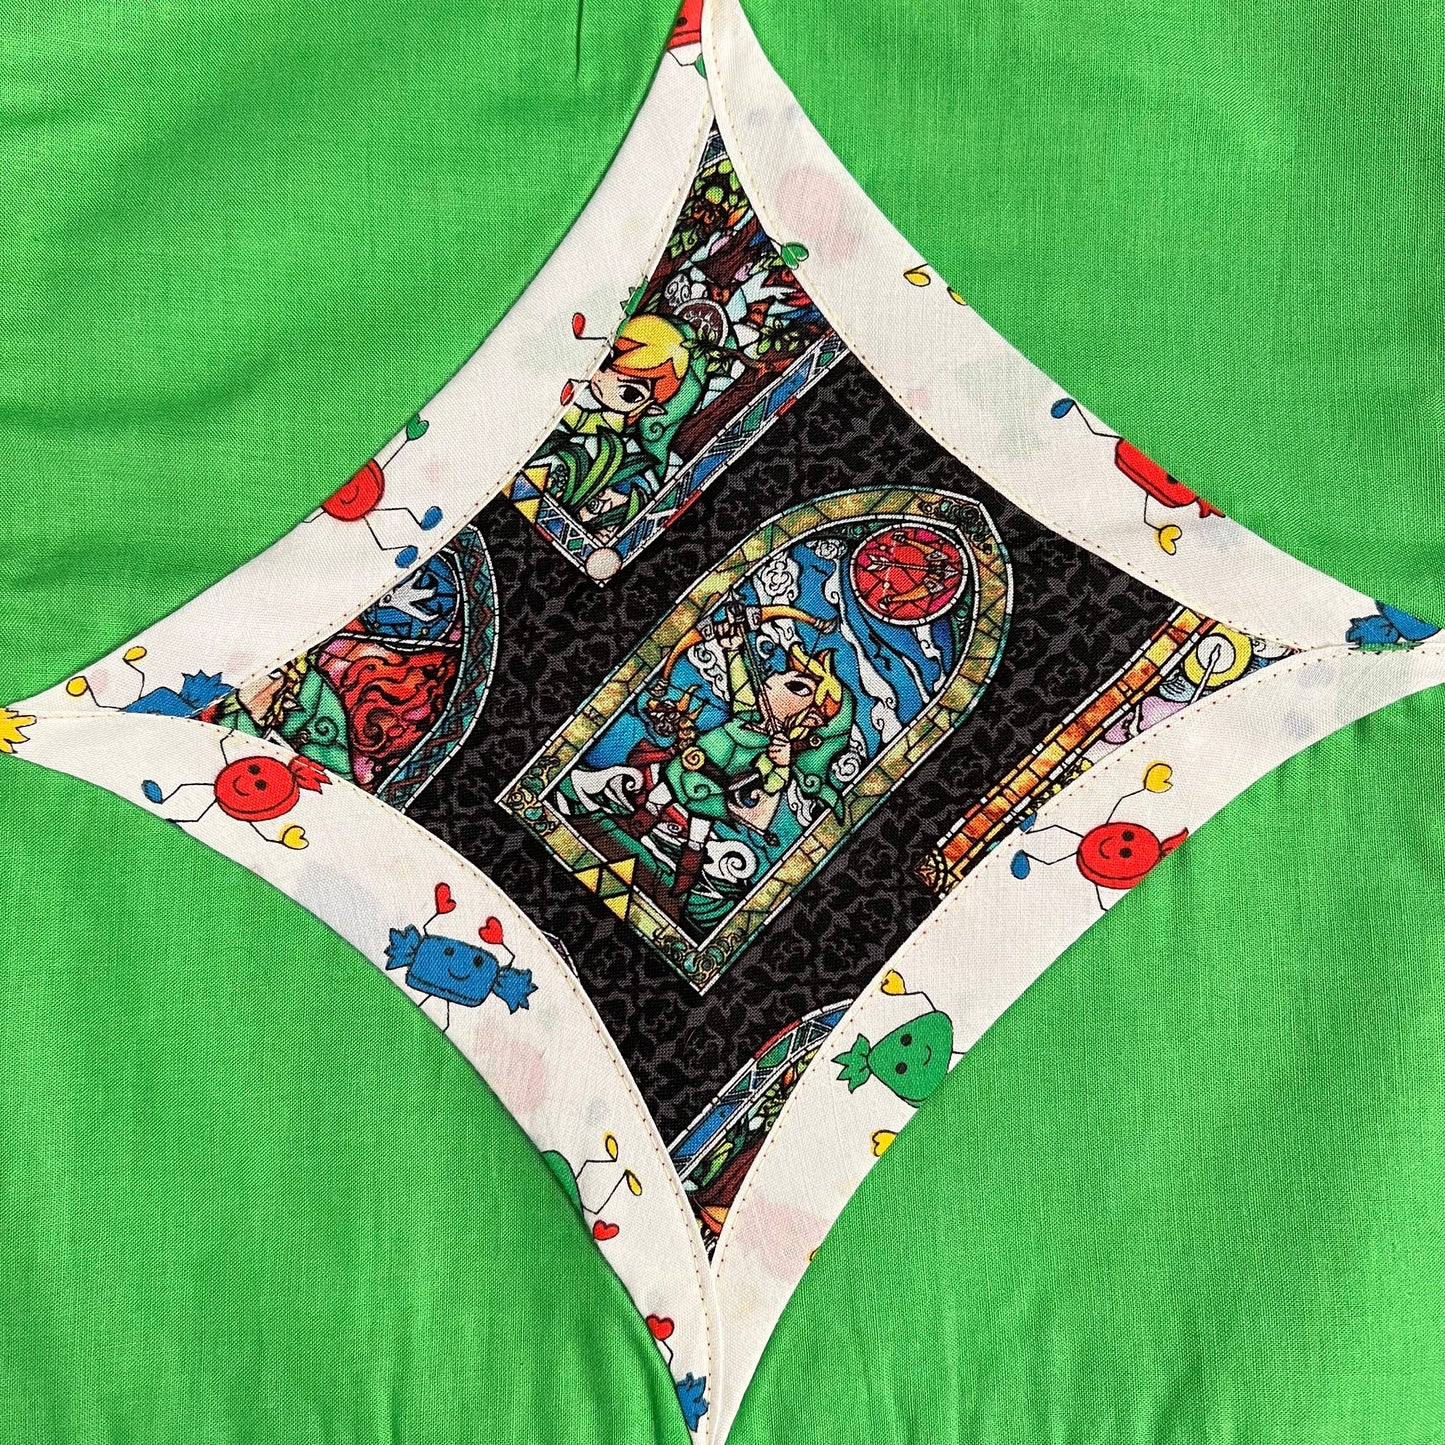 zelda fabric square, surrounded by retro candy, then neon green fabric